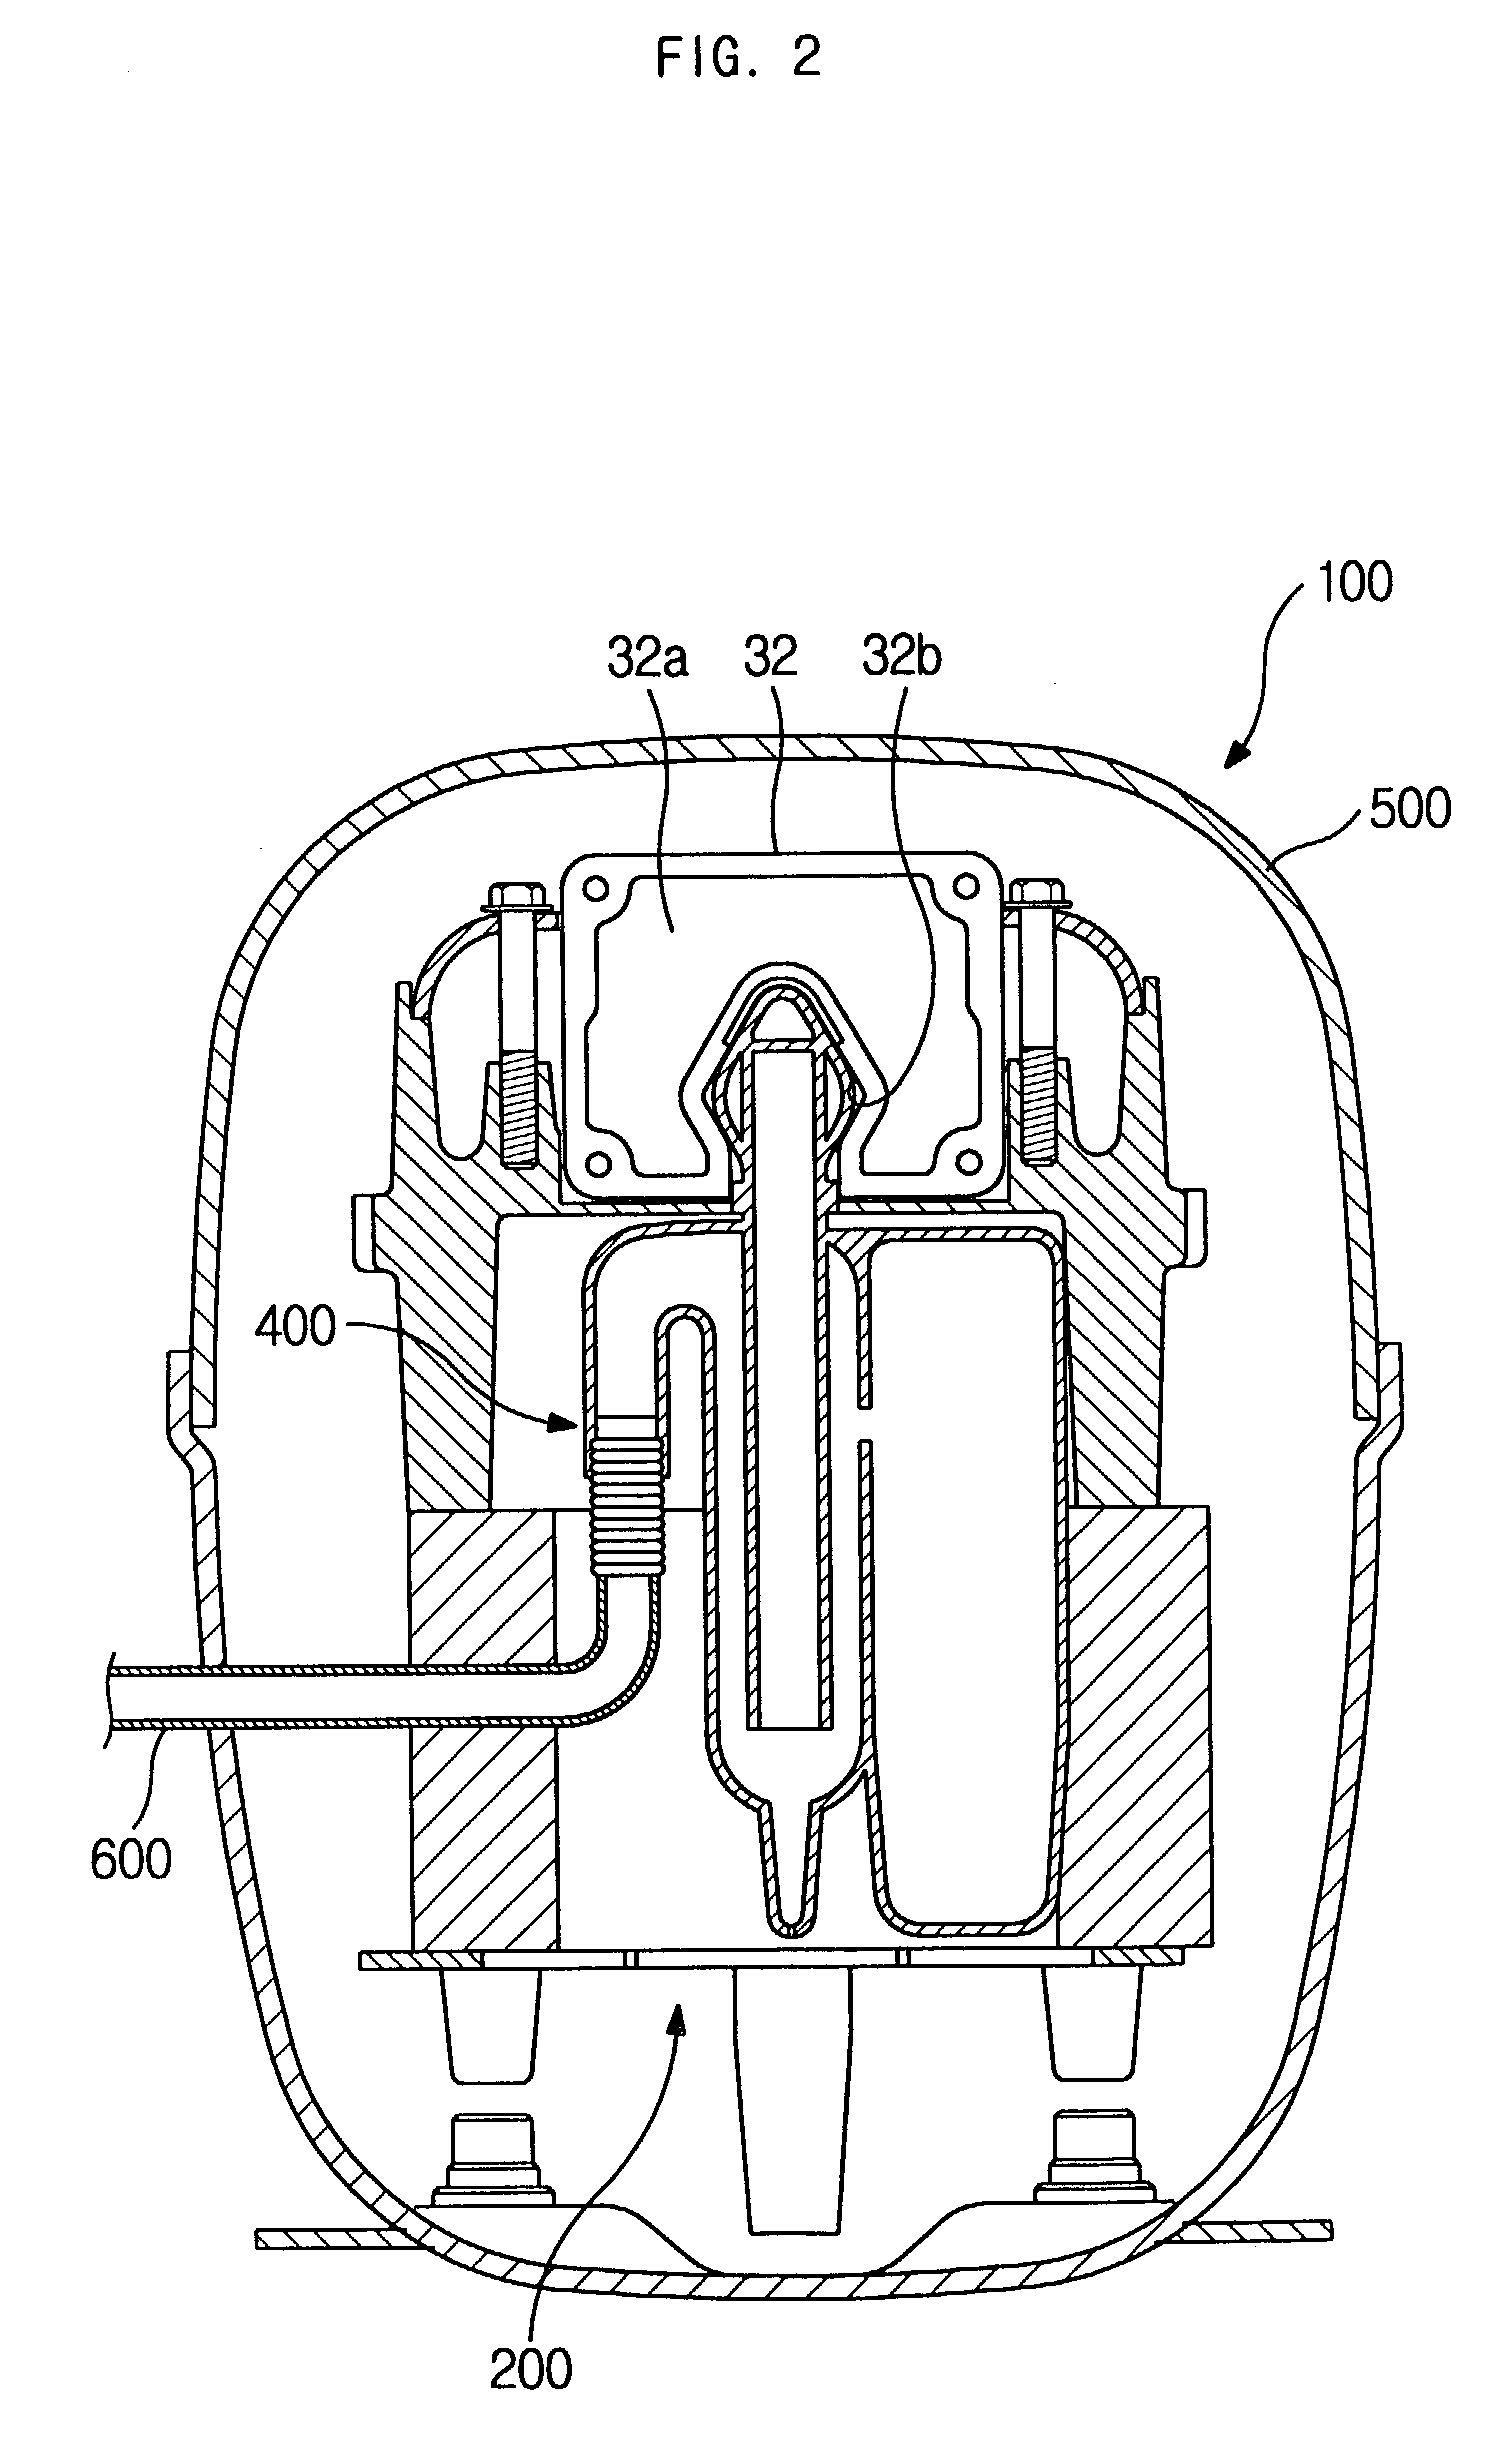 Suction muffler for compressors, compressor with the suction muffler, and apparatus having refrigerant circulation circuit including the compressor